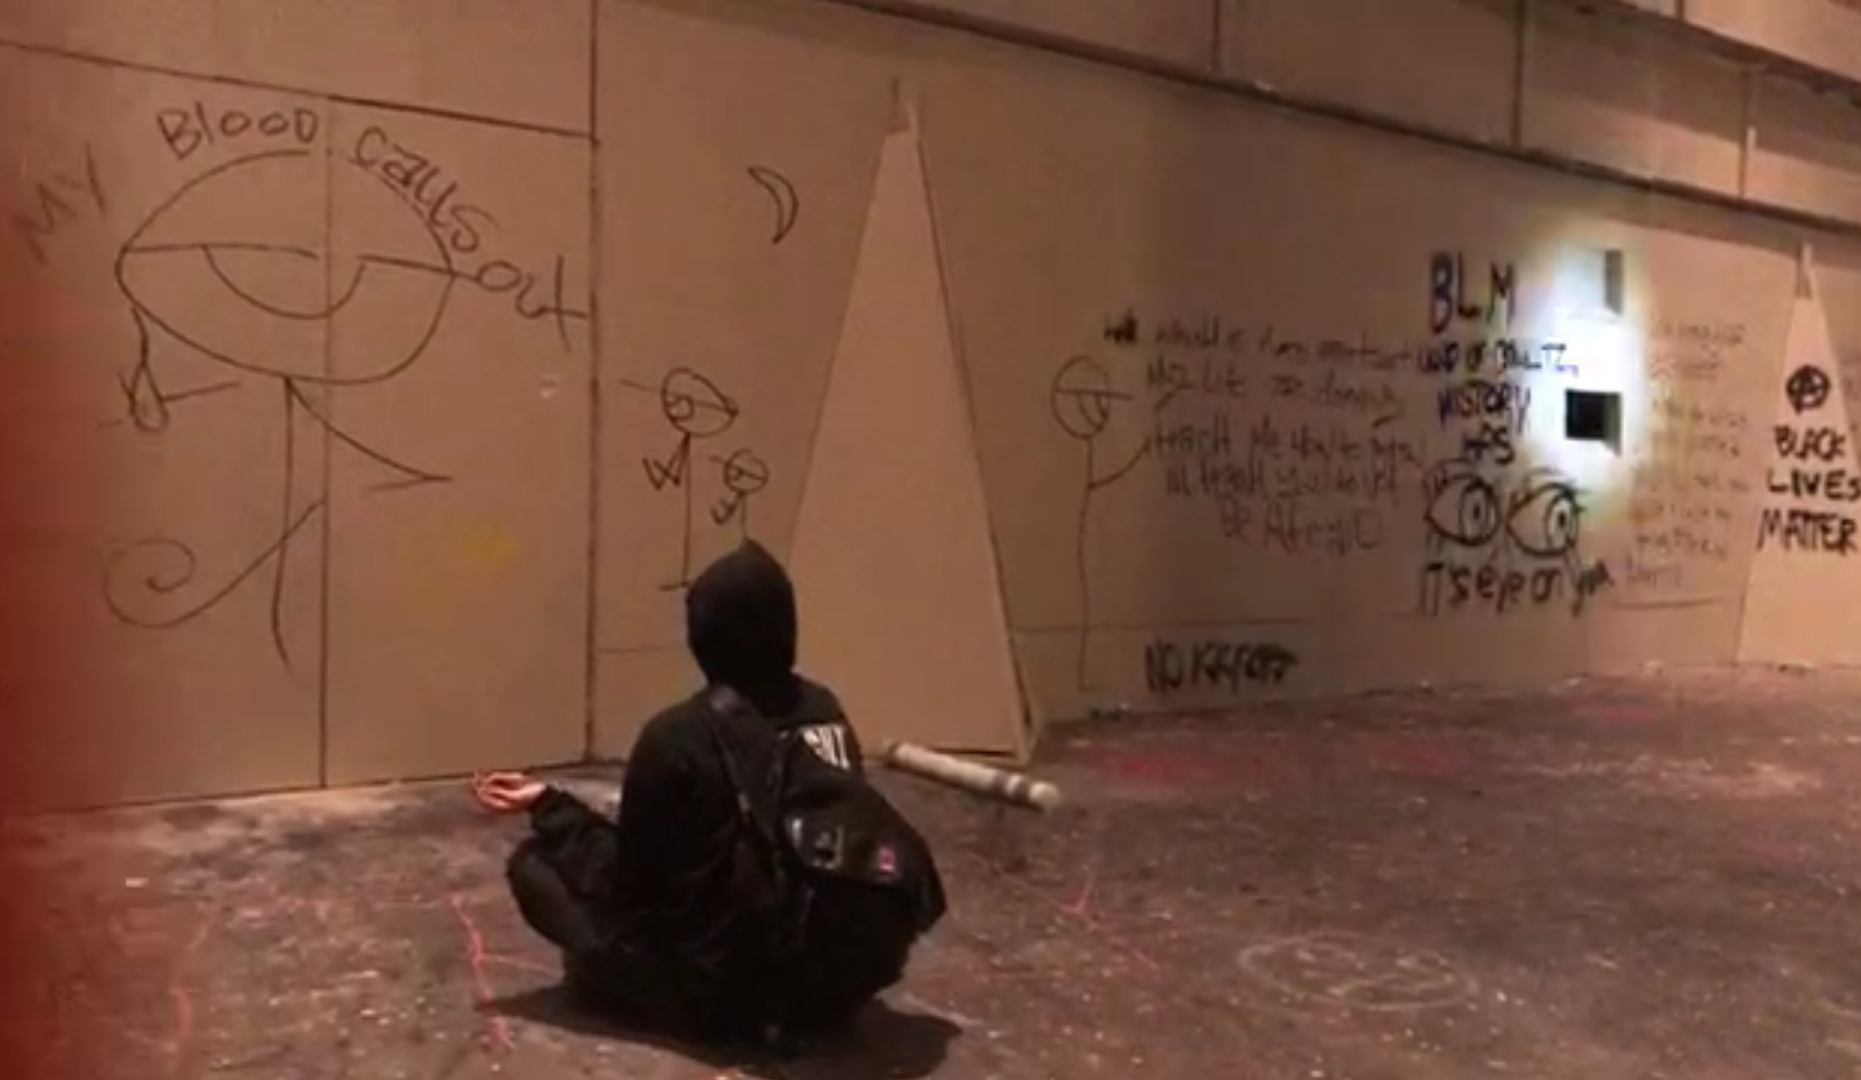 Protester meditating in front of graffiti